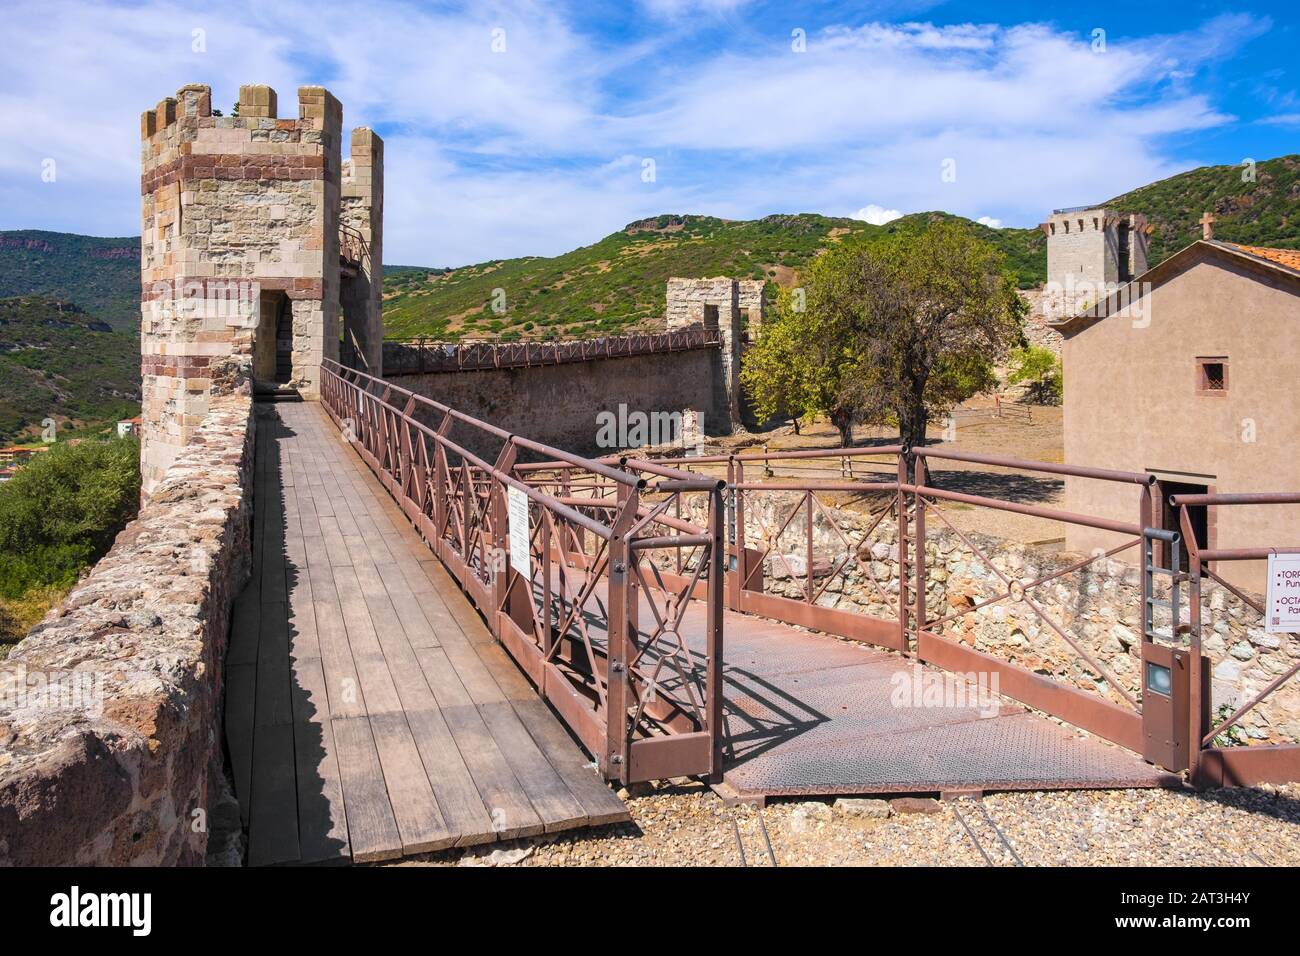 Bosa, Sardinia / Italy - 2018/08/13: Main tower - Torre Maestra - of the Malaspina Castle, known also as Castle of Serravalle, with monumental historic defense walls and fortification Stock Photo